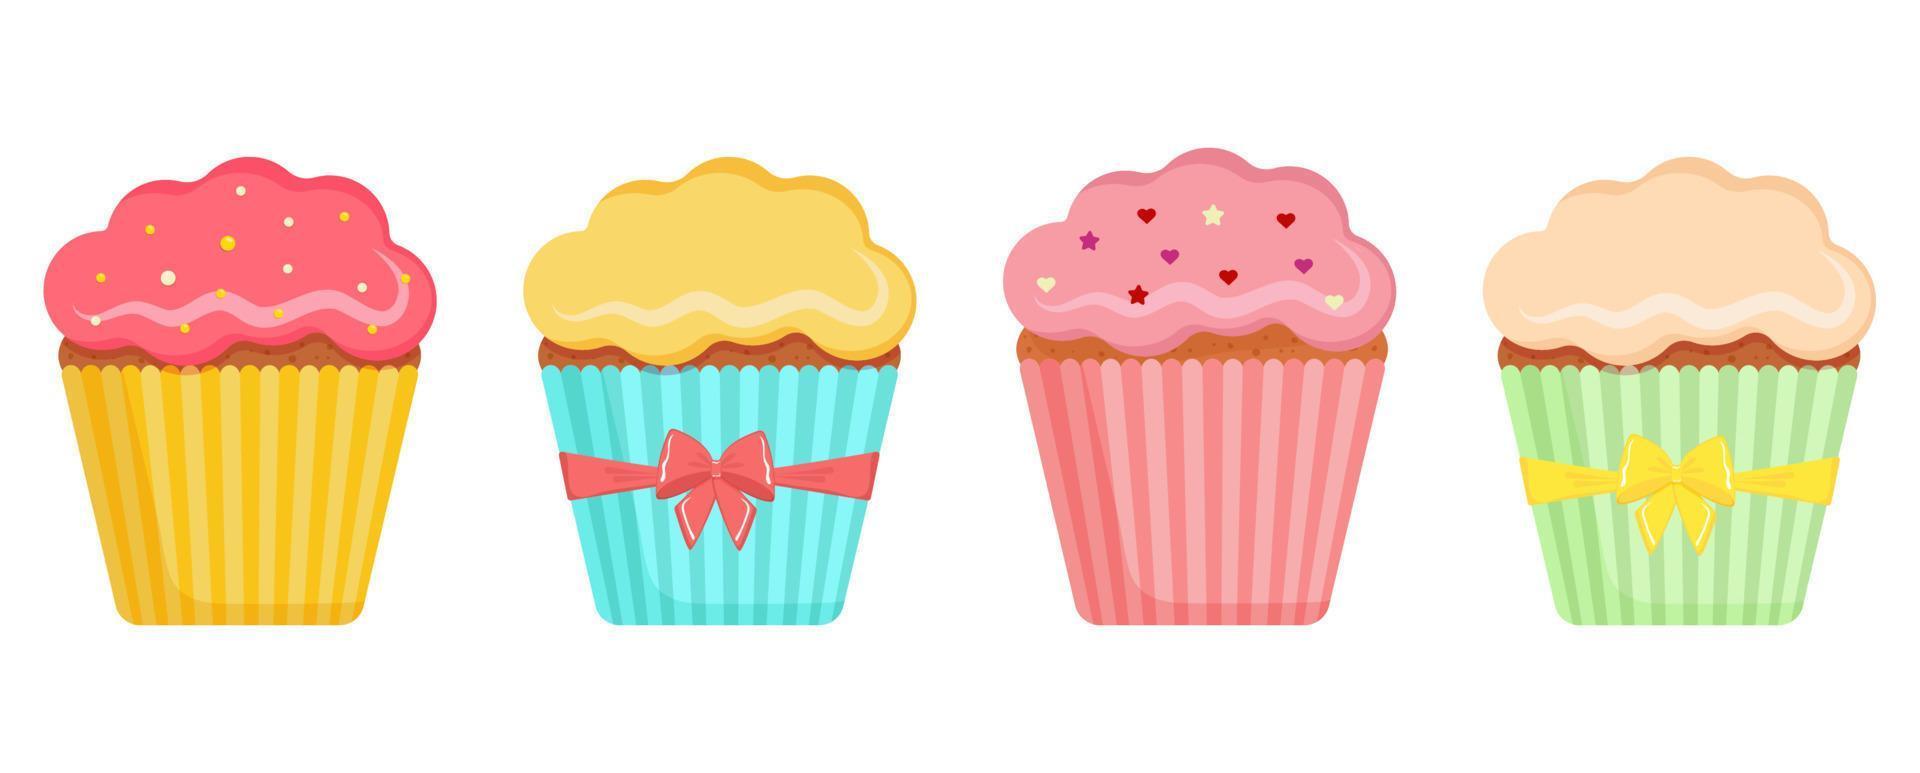 Colorful muffin collection. Vector illustration.